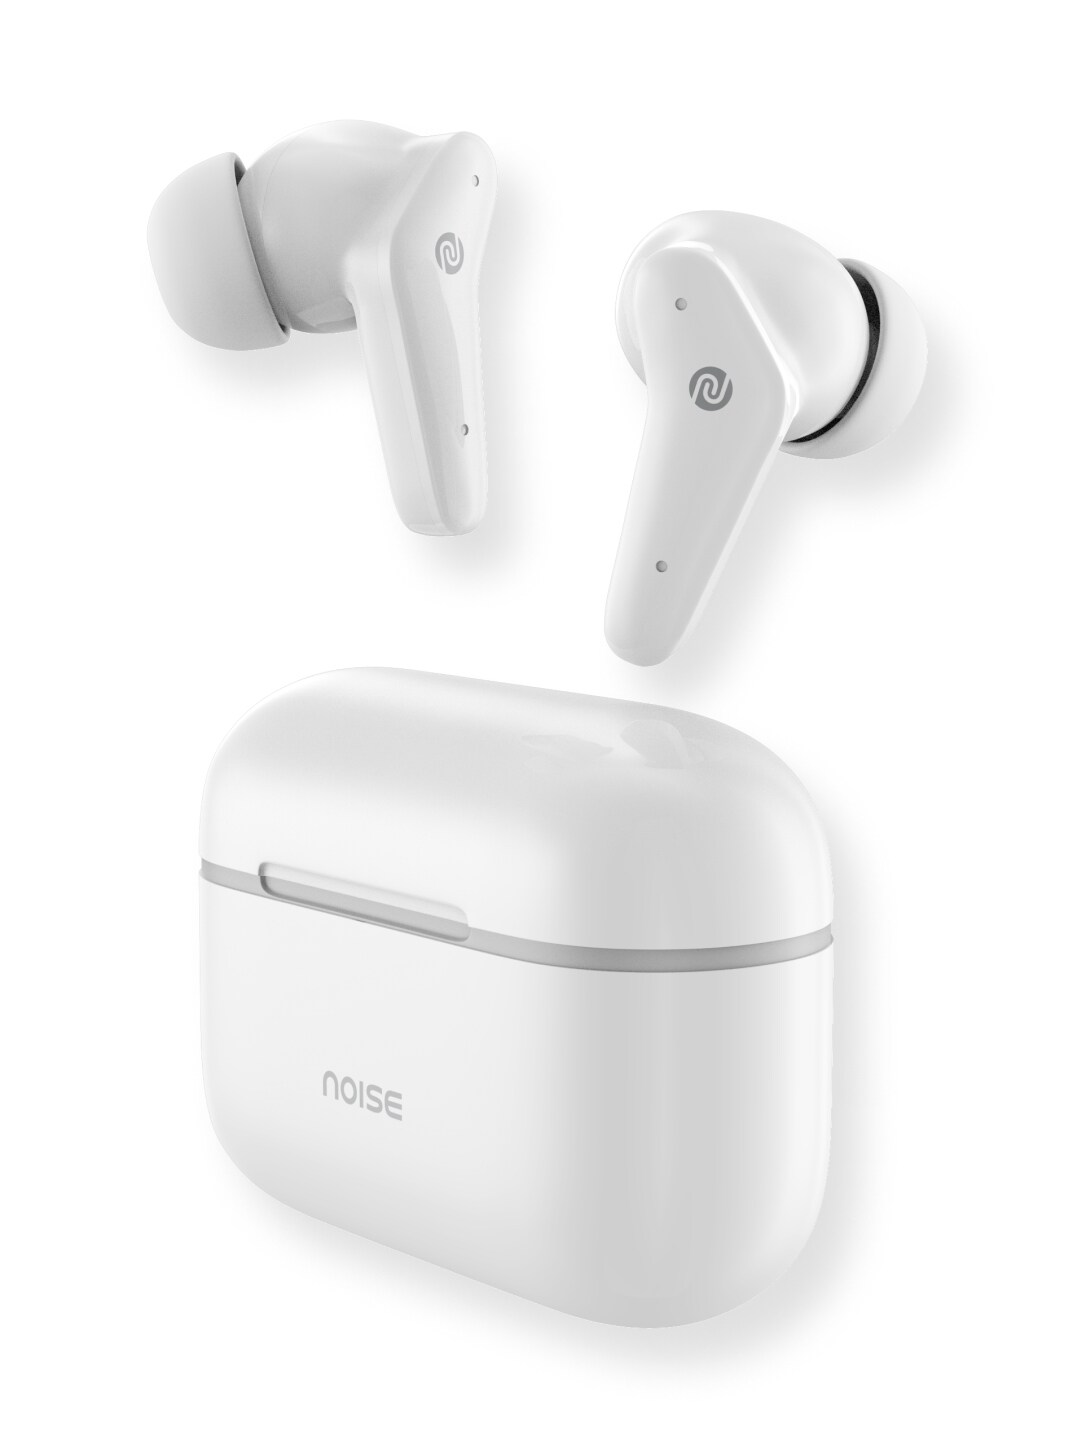 Noise Buds VS102 Truly Wireless Bluetooth Headset  (Pearl White, True Wireless) Price in India